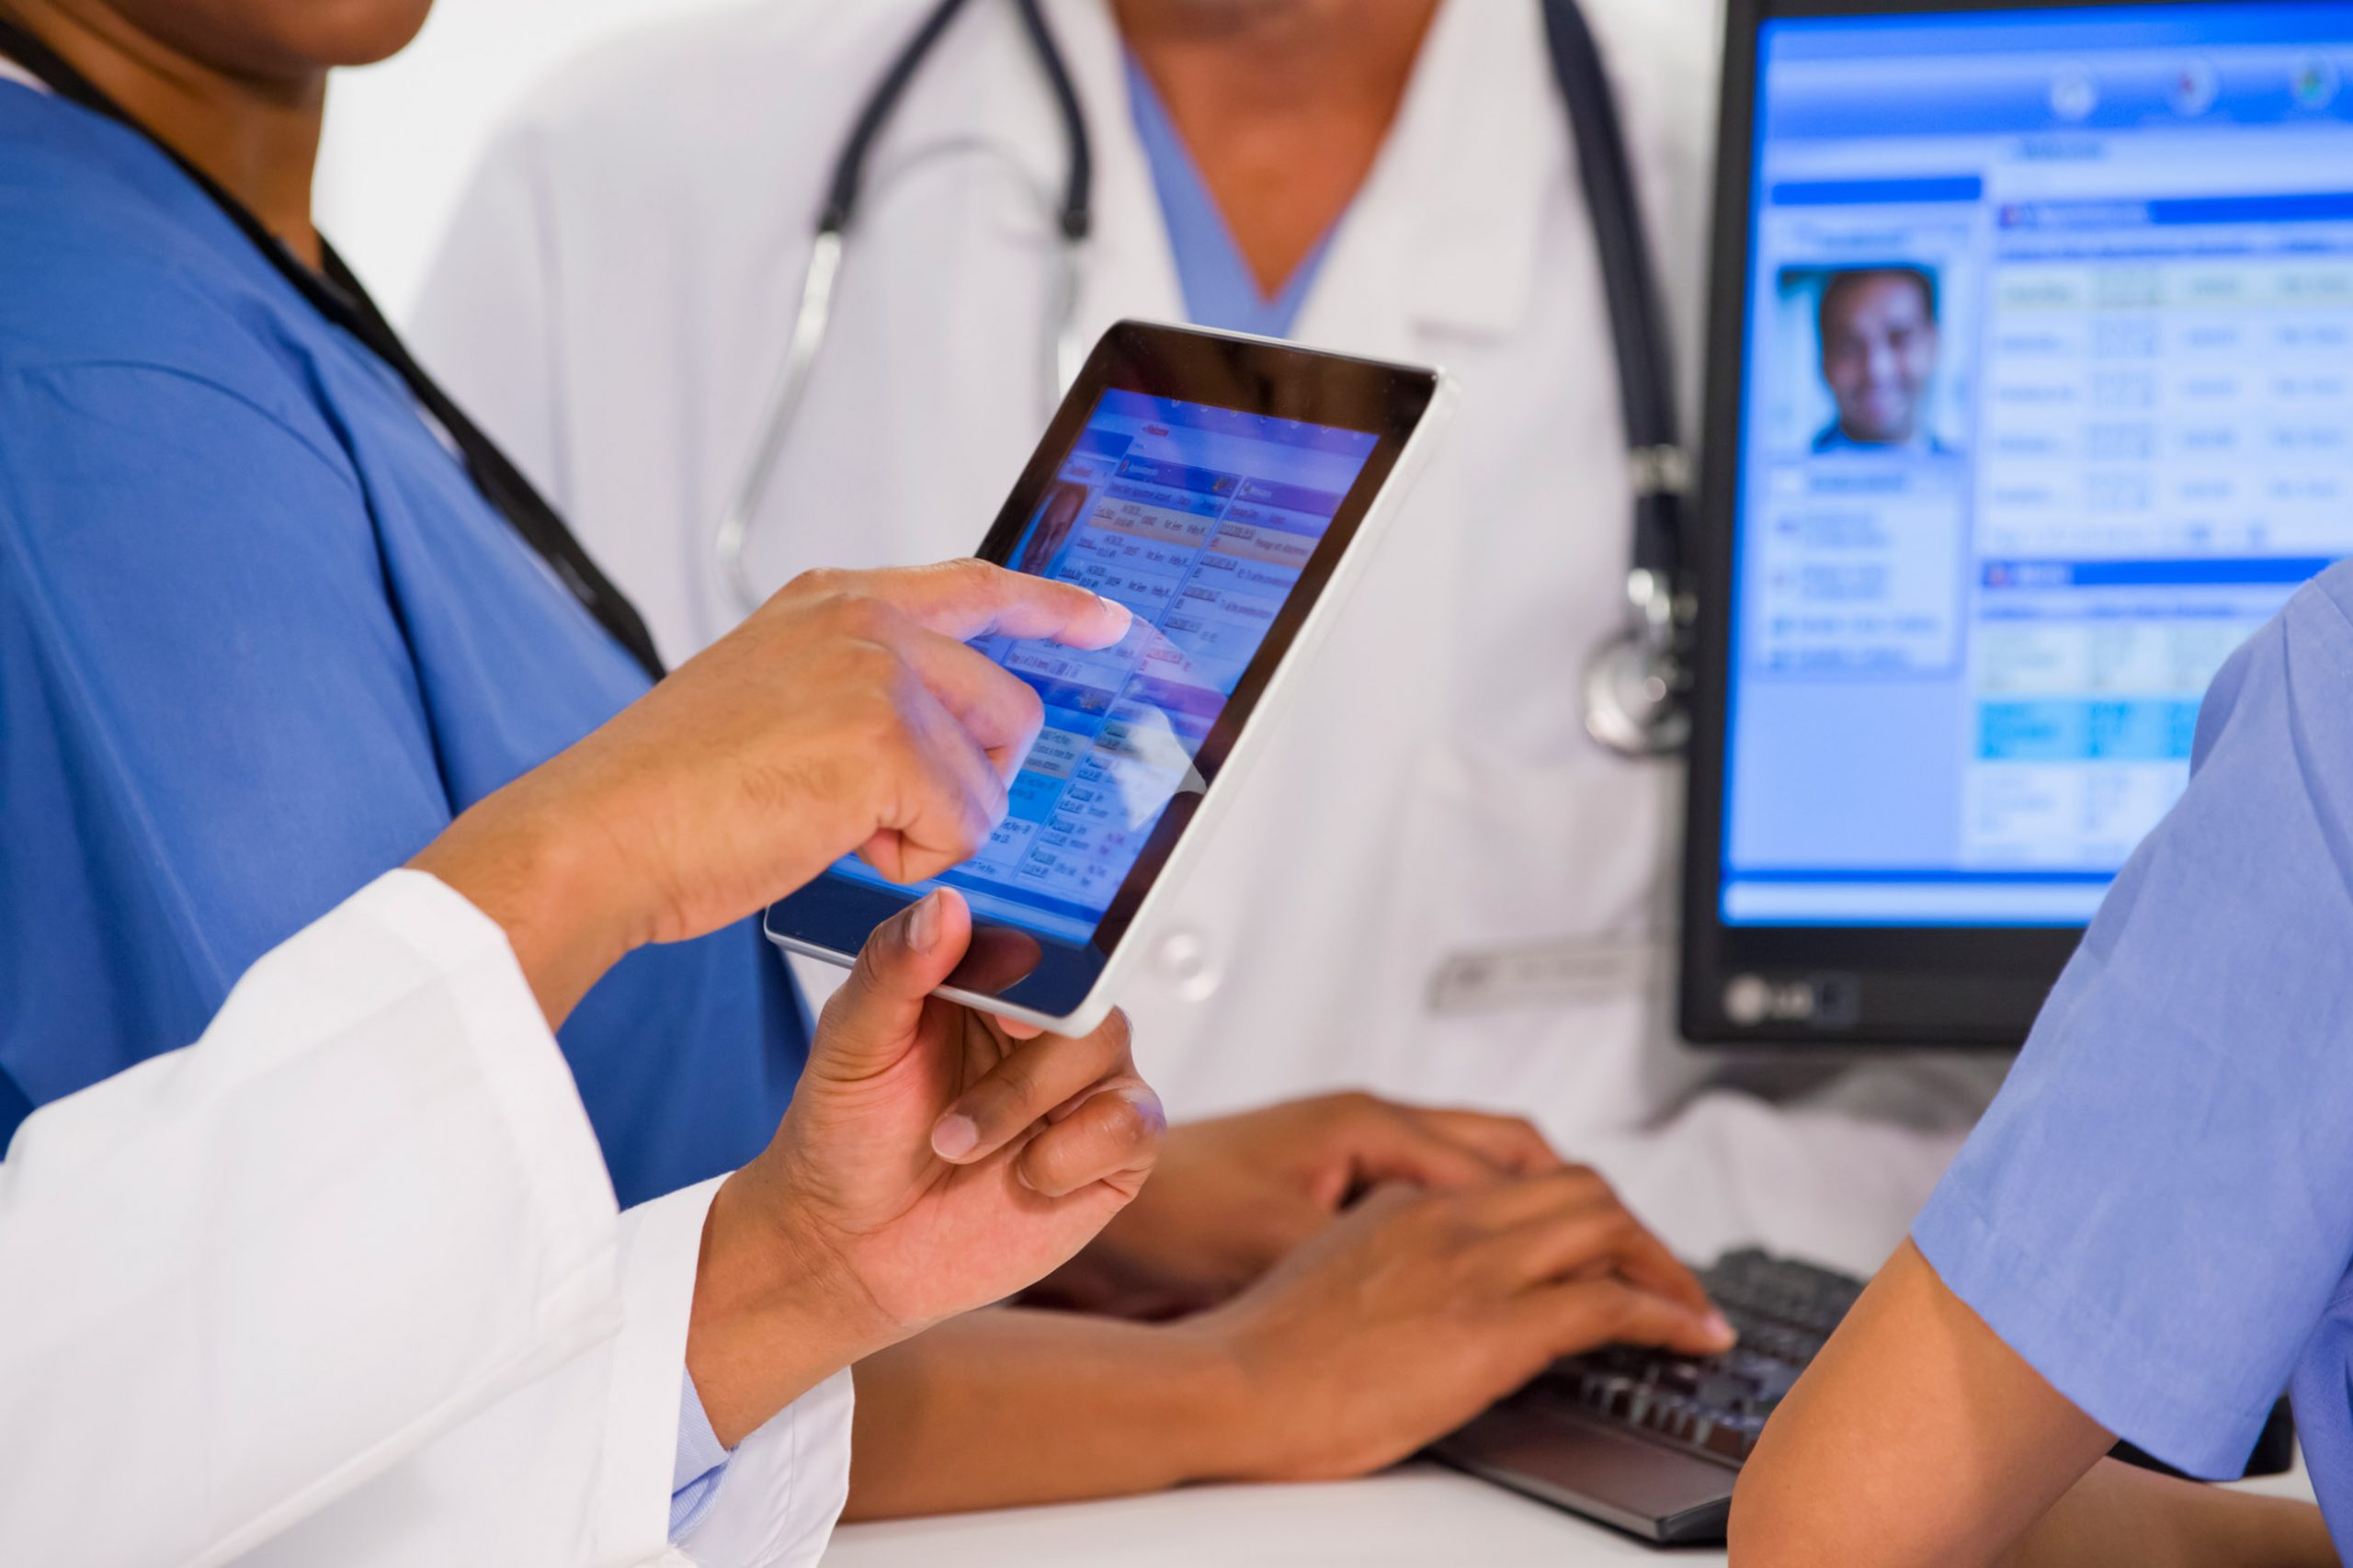 What Are the Top Emerging Healthcare Trends in the Digital B